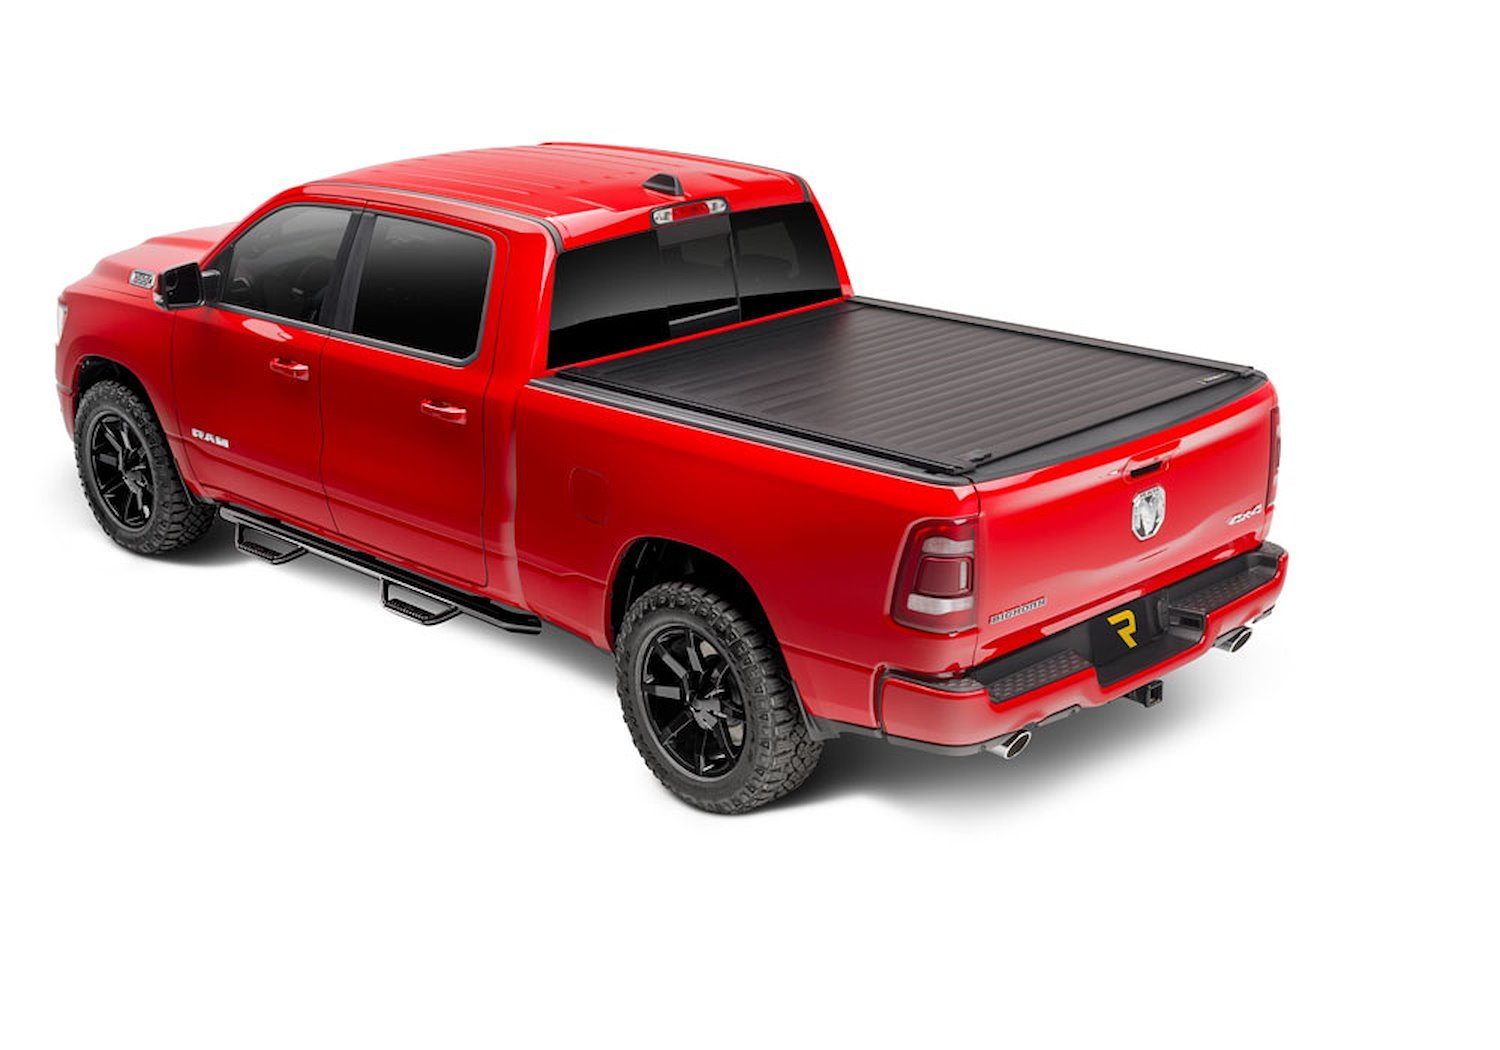 T-80232 RetraxPRO XR Retractable Tonneau Cover Fits Select Ram 1500/2500/3500 6' 4" Bed without RamBox without Stake Pockets